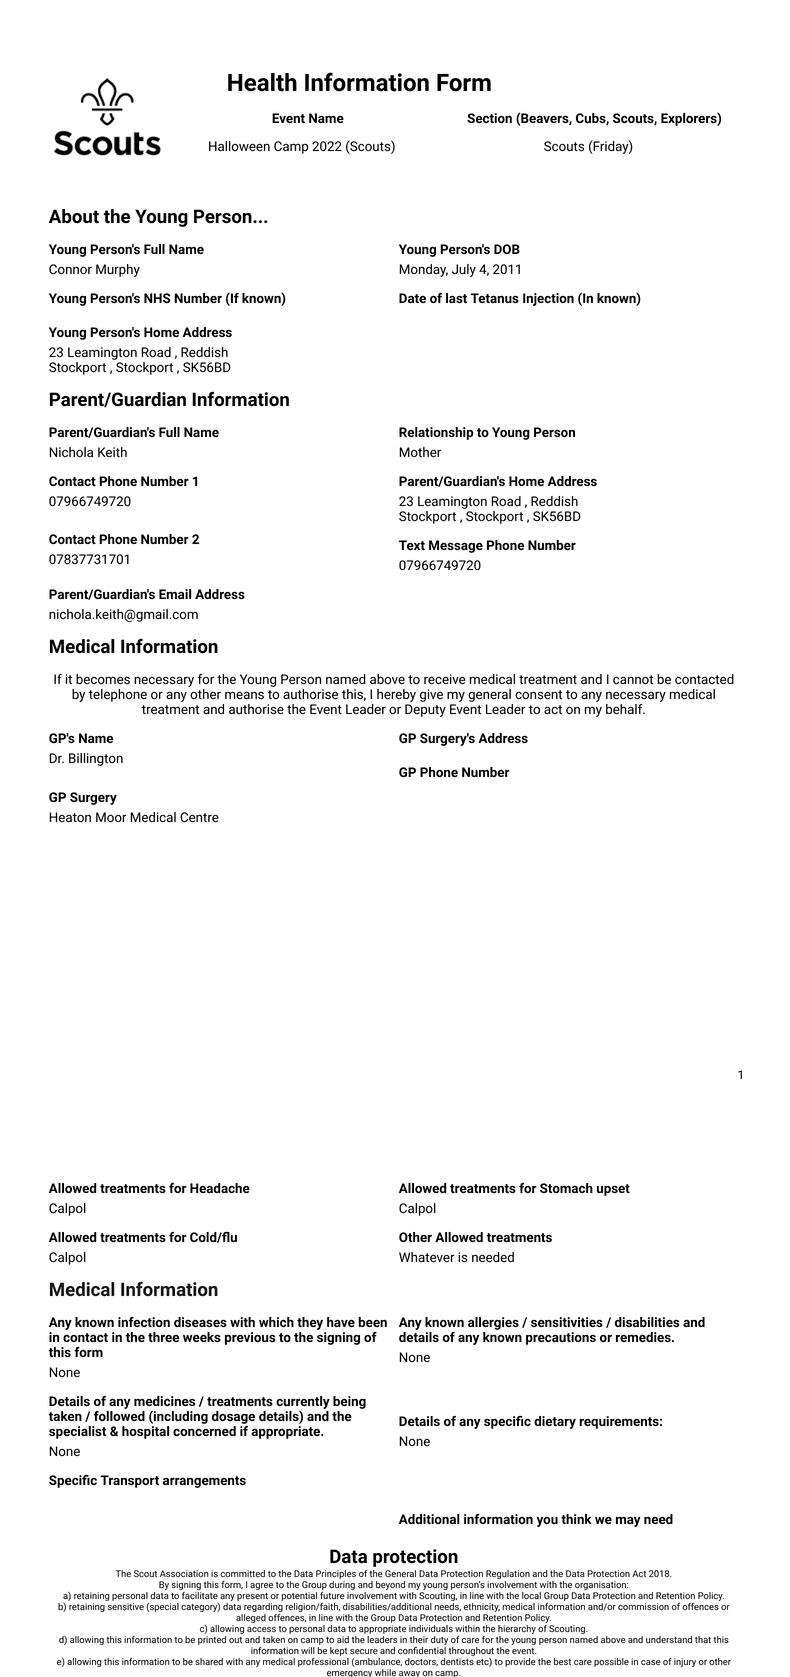 Scouts Health Information Form PDF